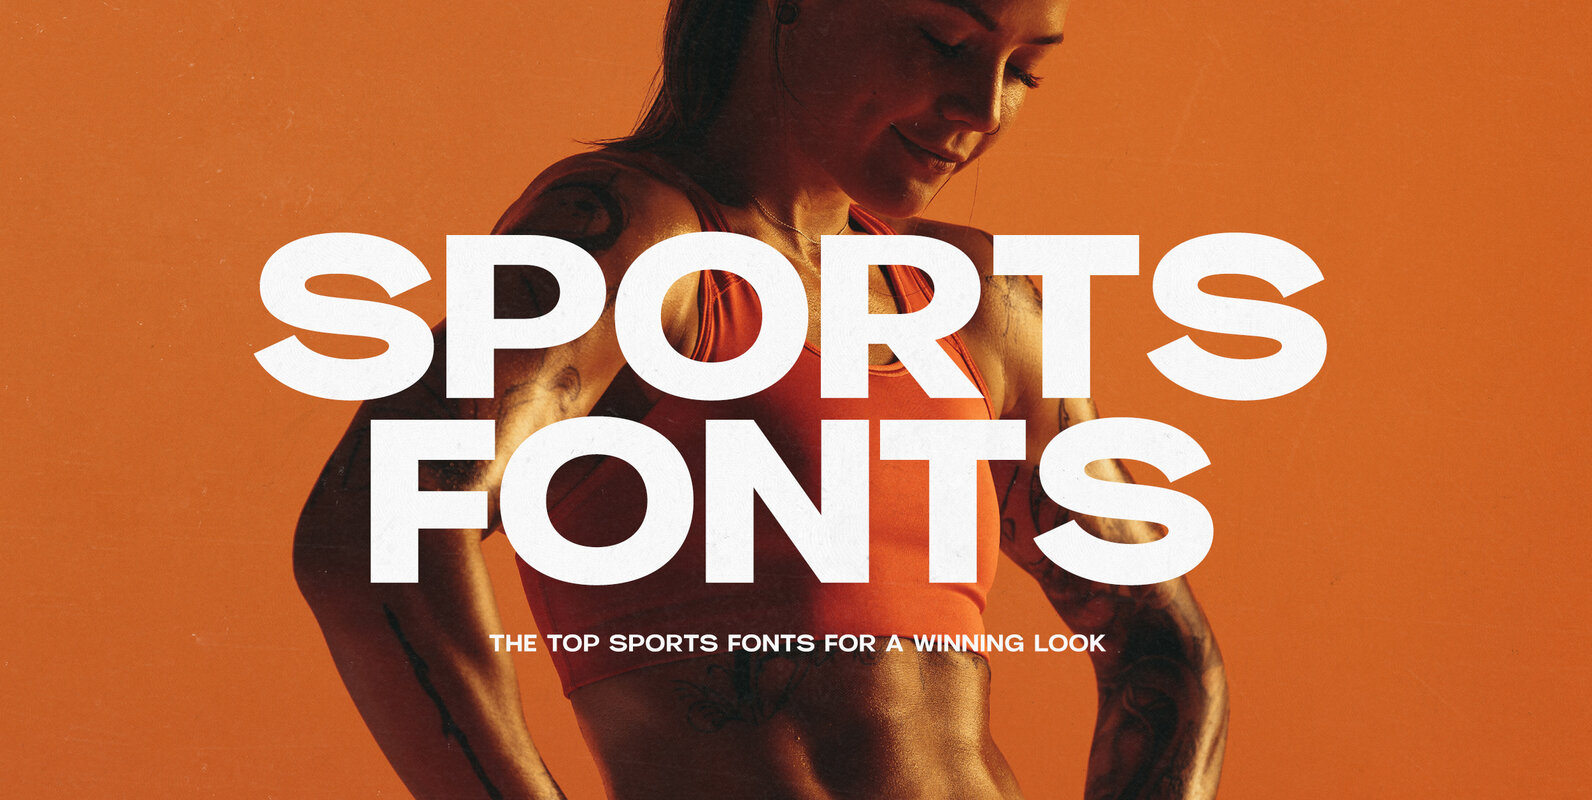 The Top Sports Fonts for a Winning Look